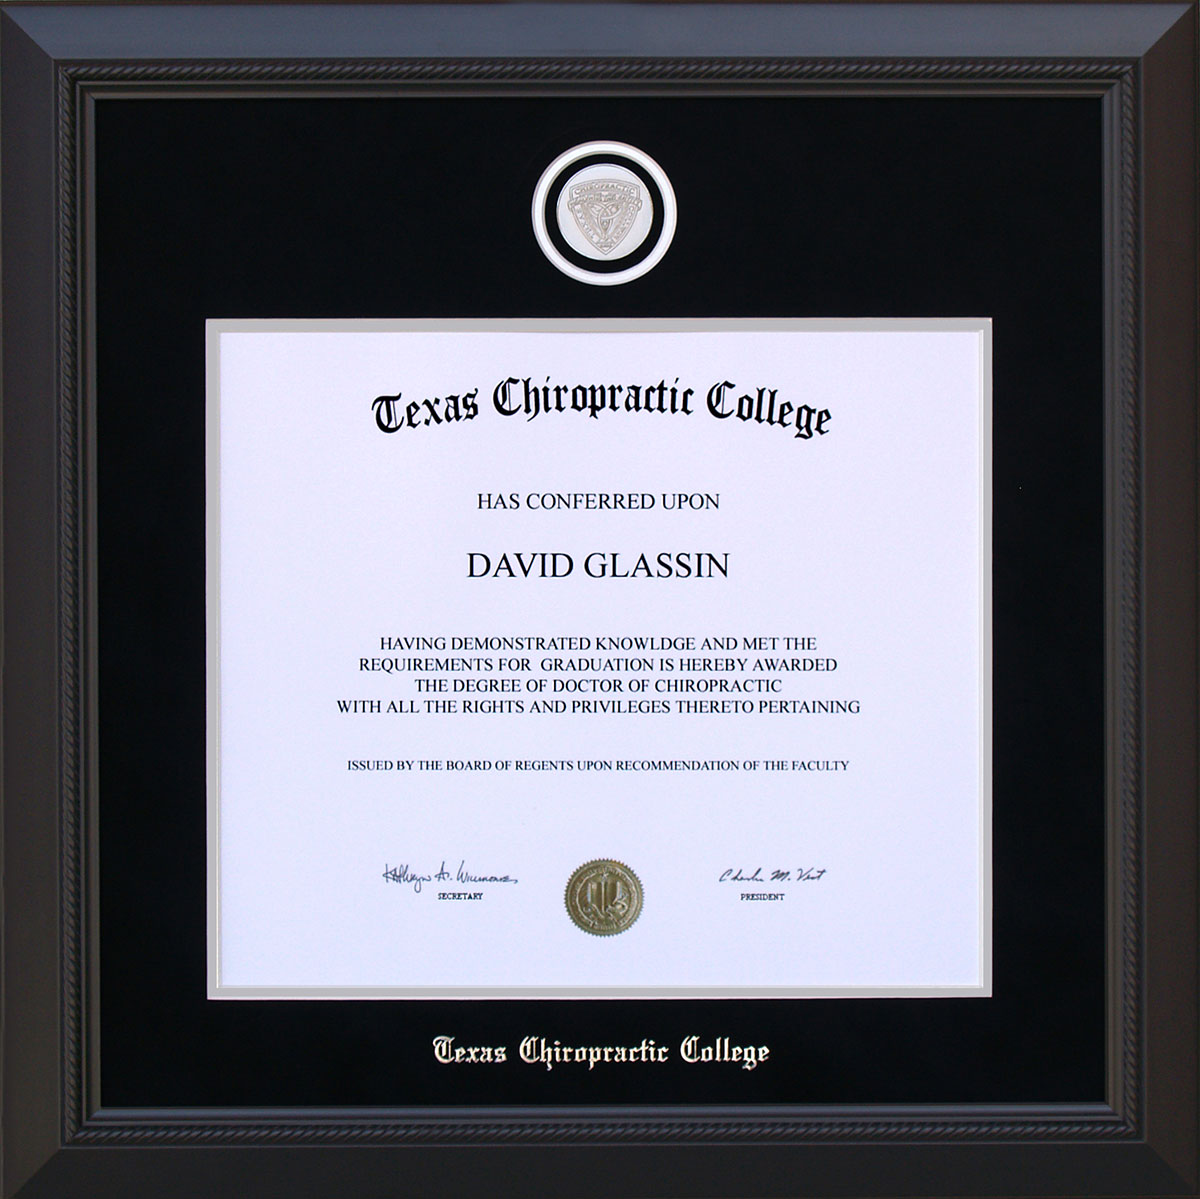 Texas Chiropractic College Diploma Frame with School Medallion by Wordyisms